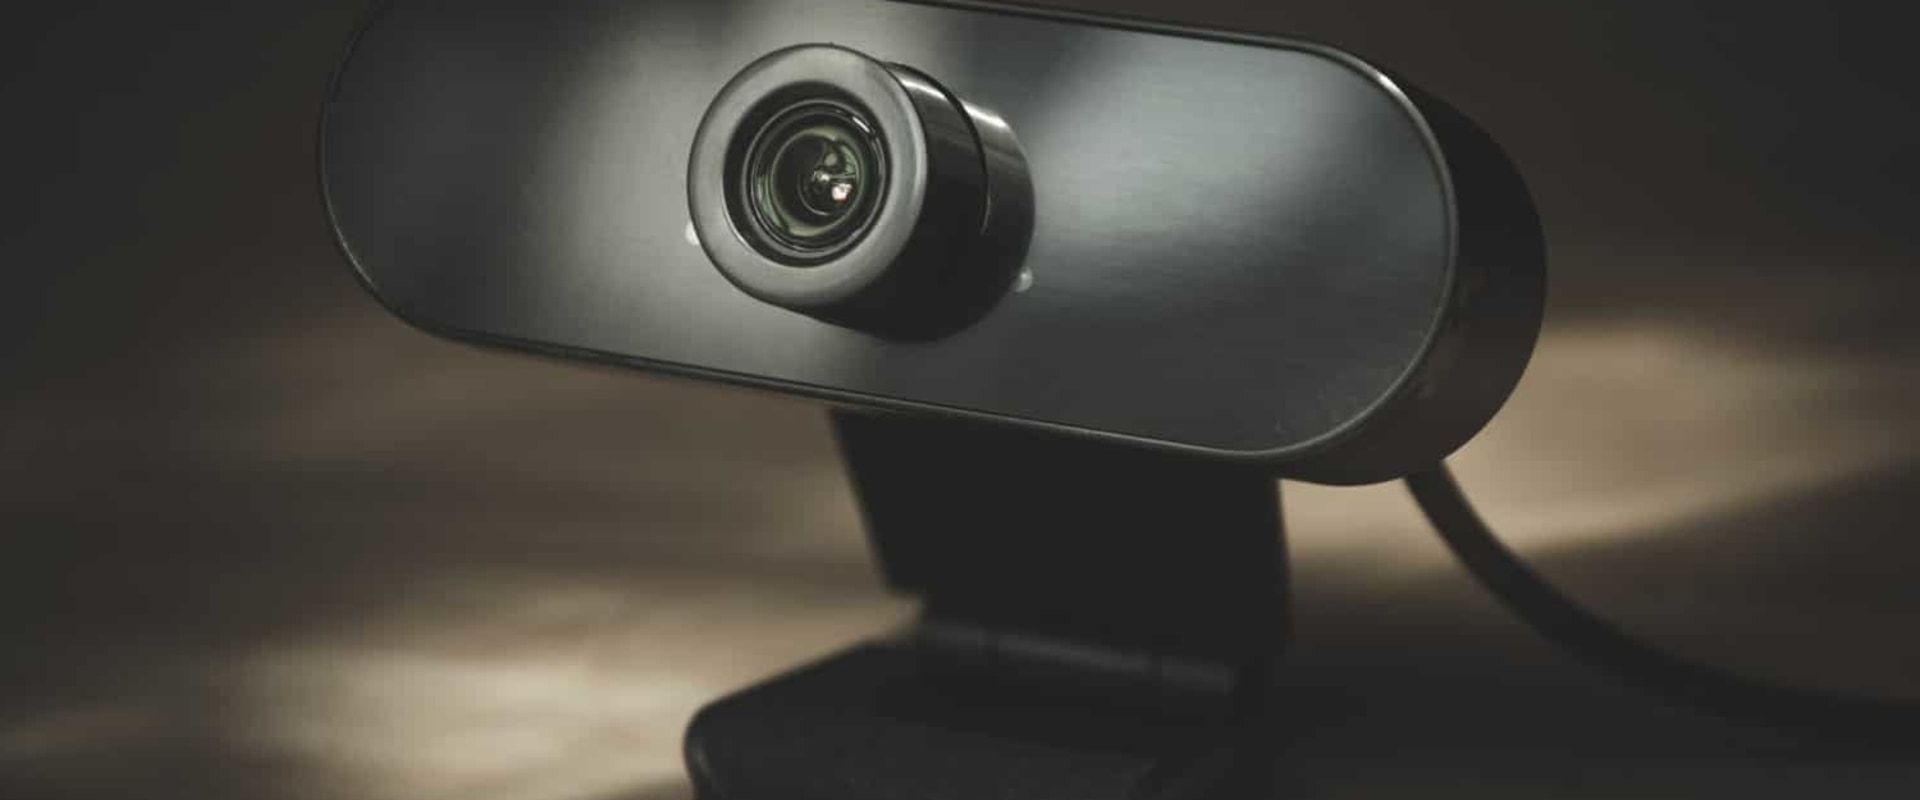 Features to Consider Before Buying a Webcam